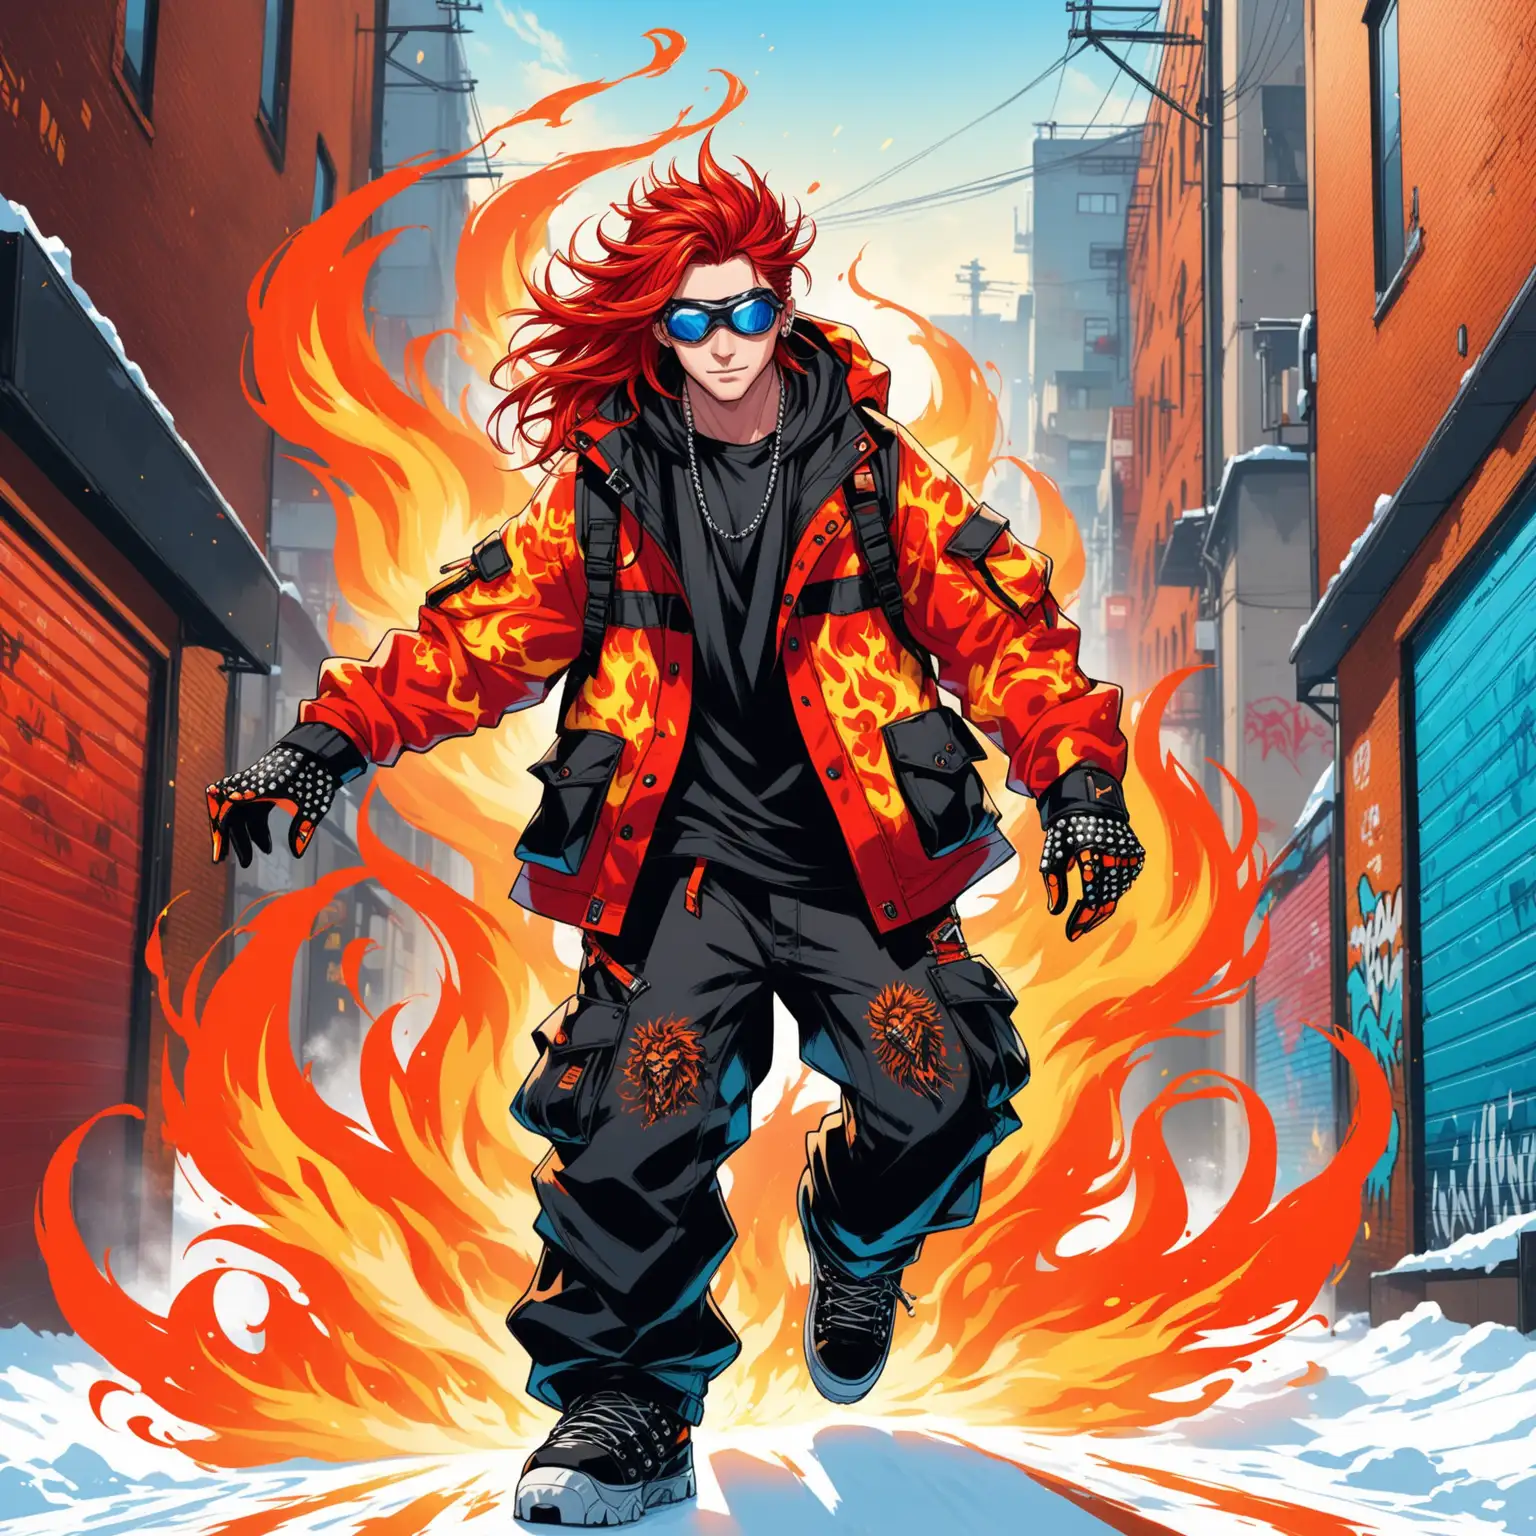  He's got the looks of a rockstar with a touch of rebellion. Sporting a wild mane of fiery red hair that seems to dance in the wind, his intense blue eyes gleam with the thrill of the ride. His attire is a mix of urban street style and high-performance gear - think baggy cargo pants paired with a sleek, flame-patterned snowboarding jacket adorned with graffiti-inspired designs. He rocks edgy accessories like studded gloves and chunky goggles that reflect the blazing inferno within him.